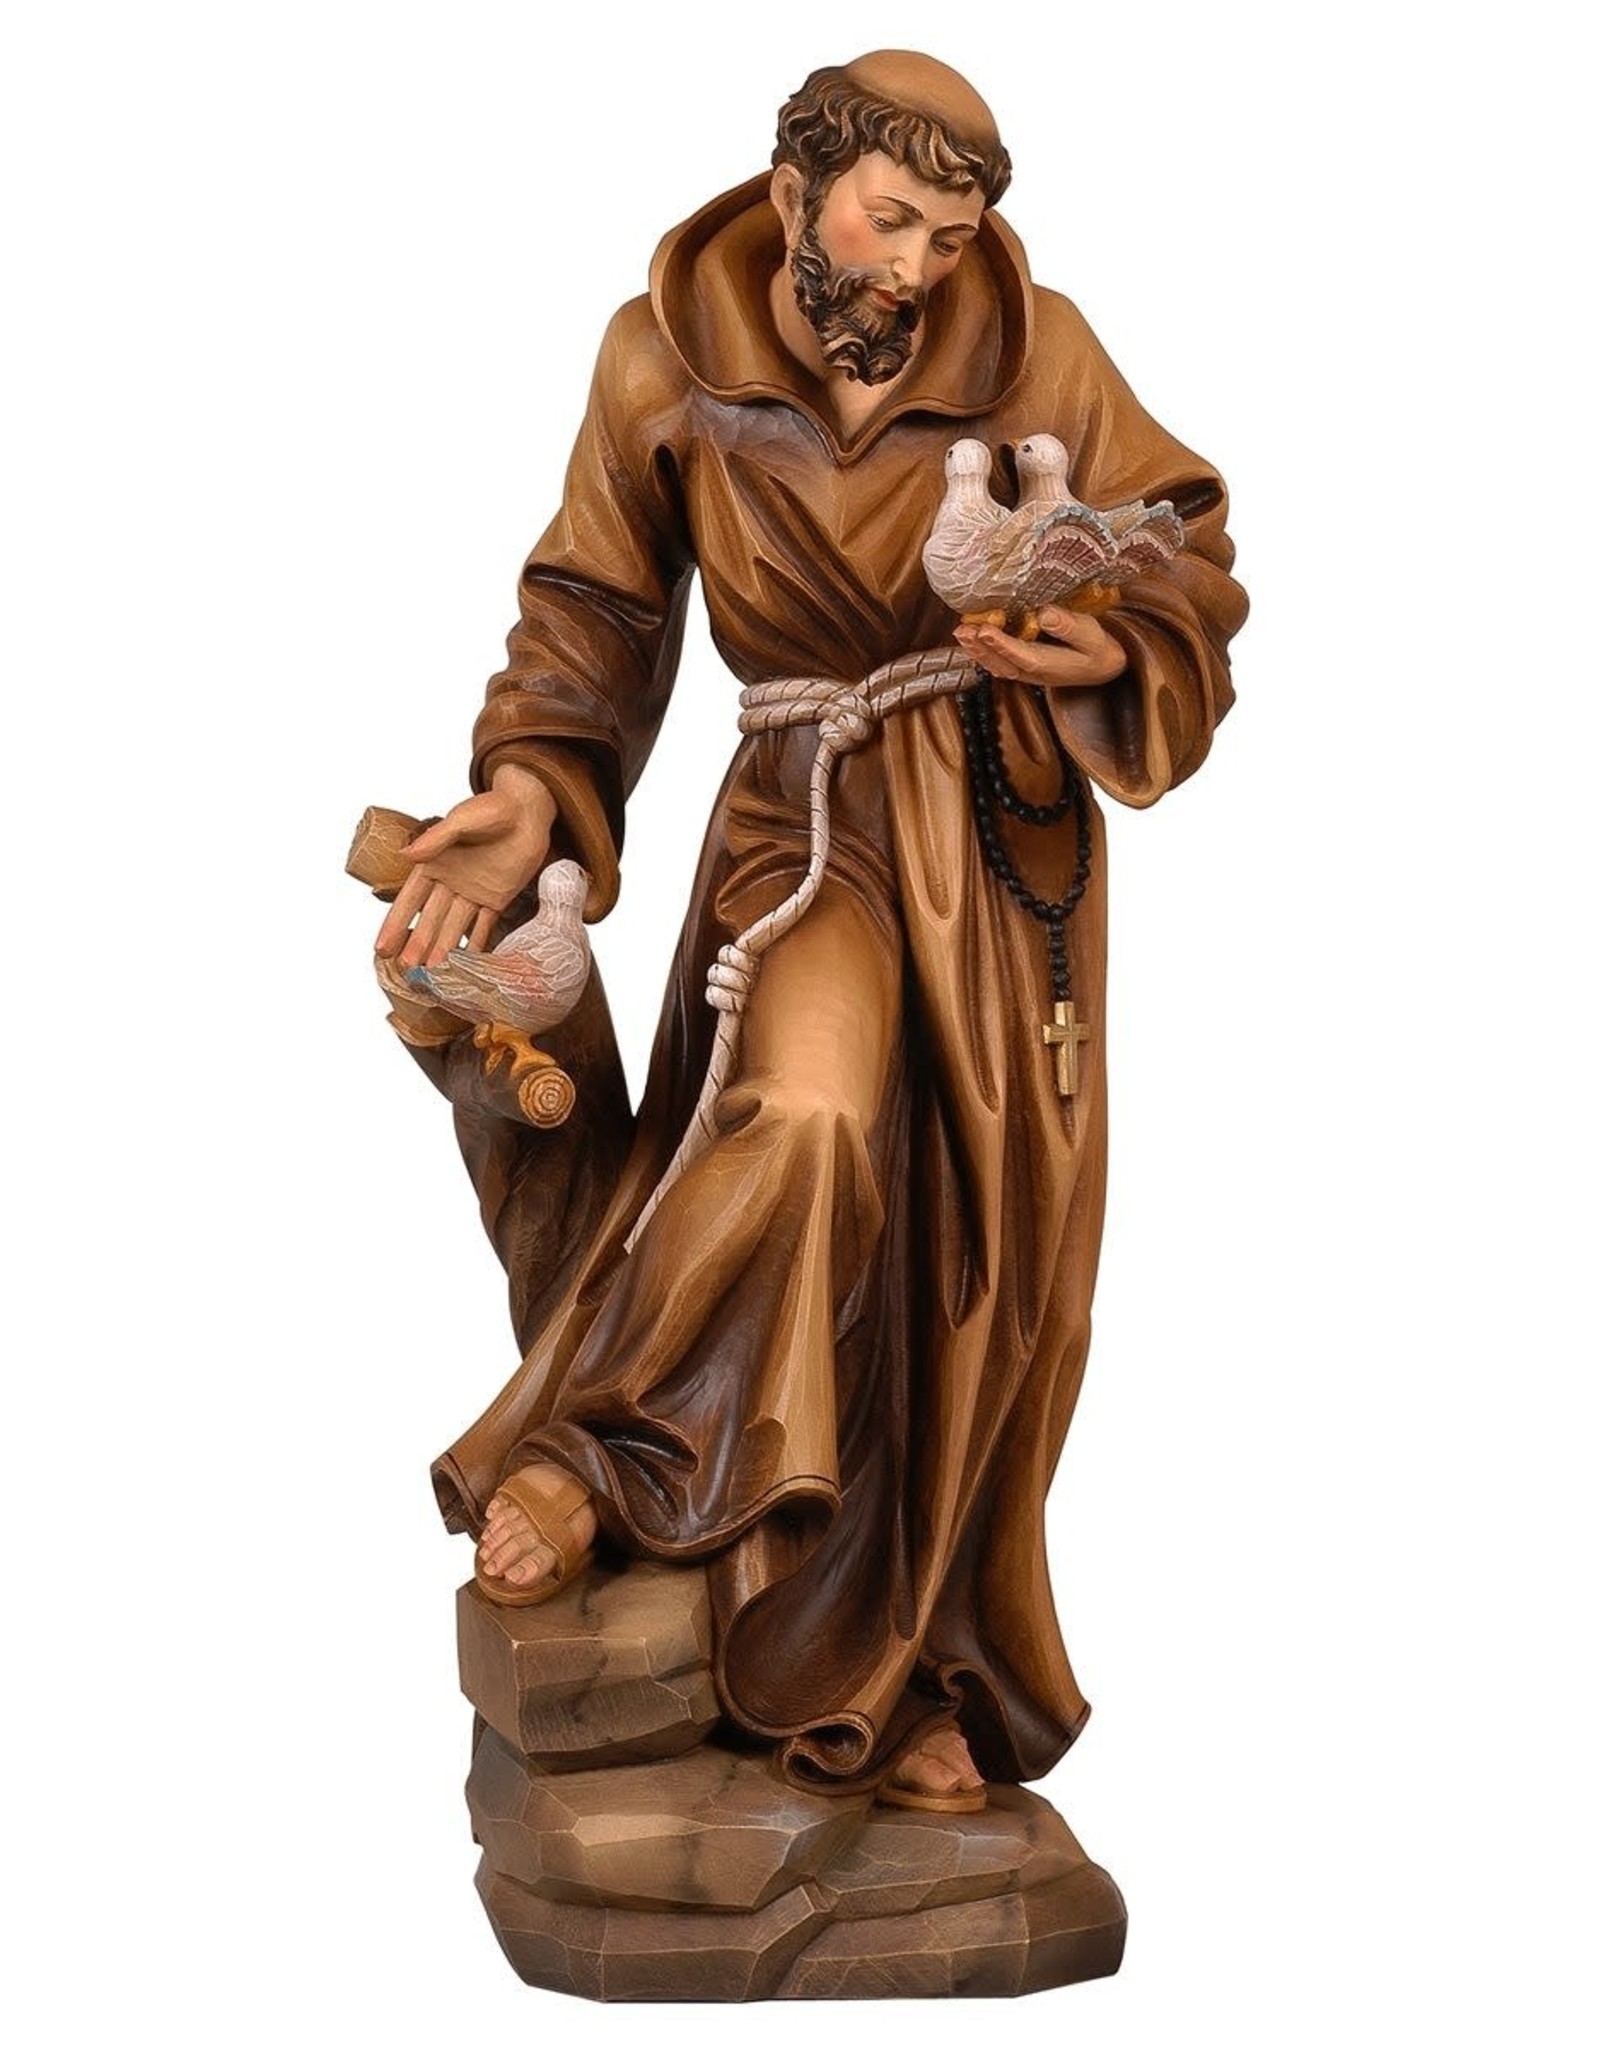 Statue - St. Francis 15" Color, Wood-Carved